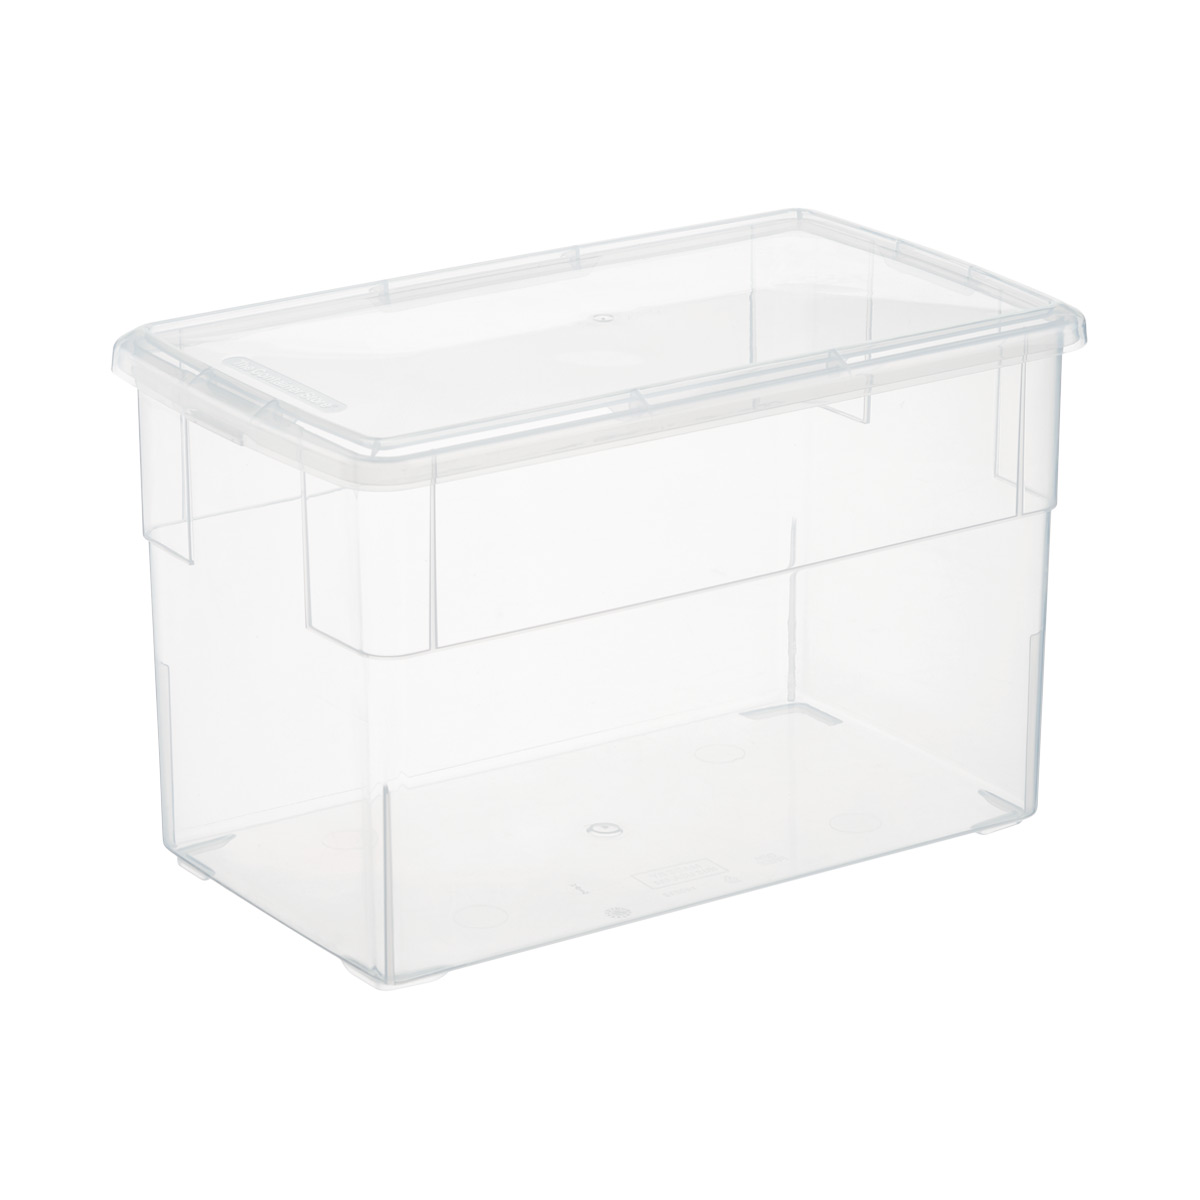 CLEAR PLASTIC STORAGE BOXES WITH LID STACKABLE STACKING CONTAINER TUB COLOURED 